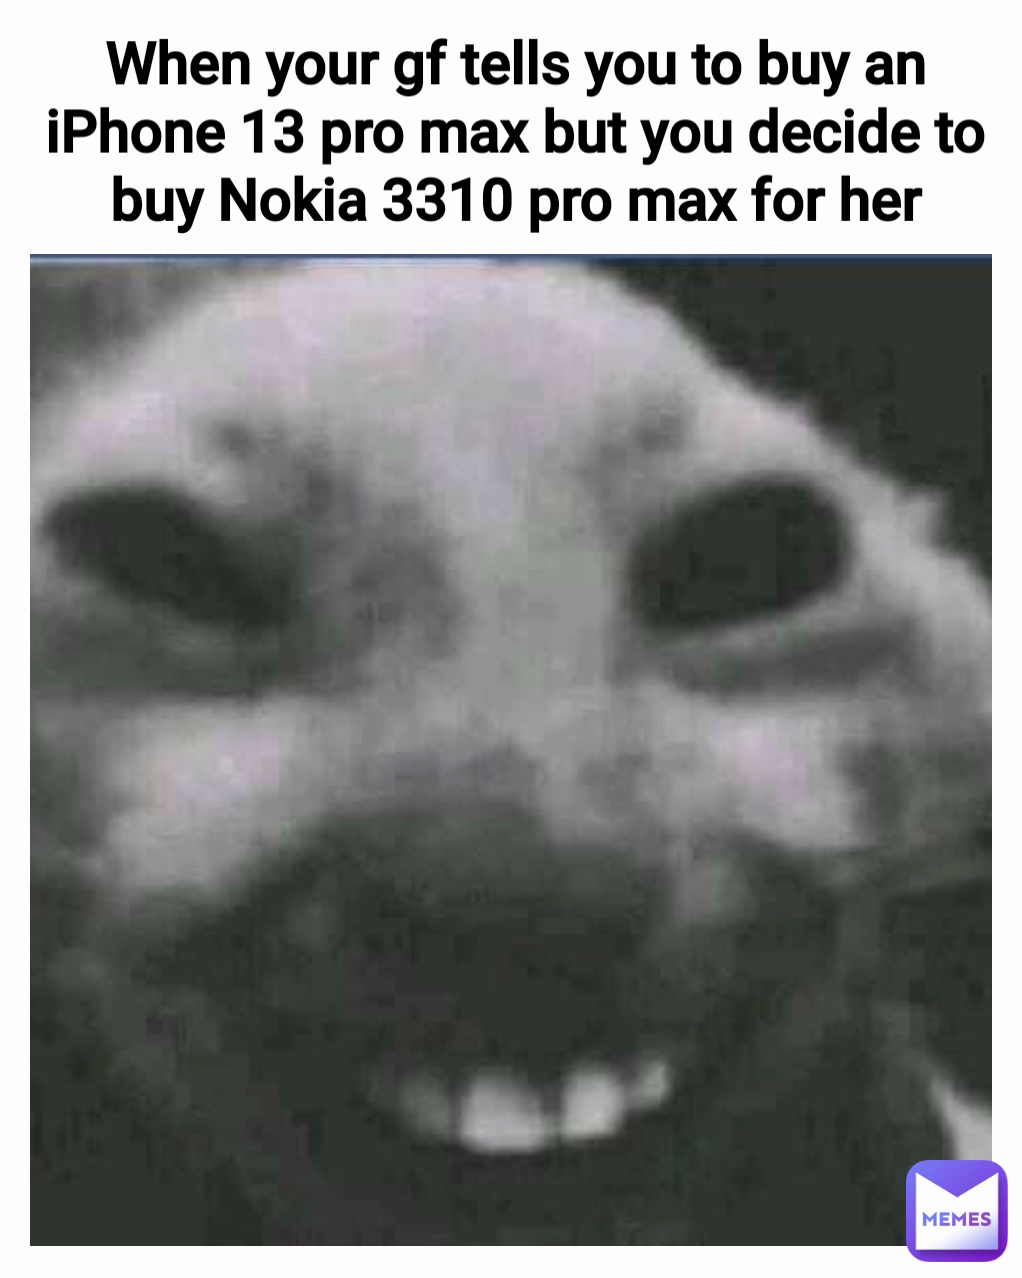 When your gf tells you to buy an iPhone 13 pro max but you decide to buy Nokia 3310 pro max for her